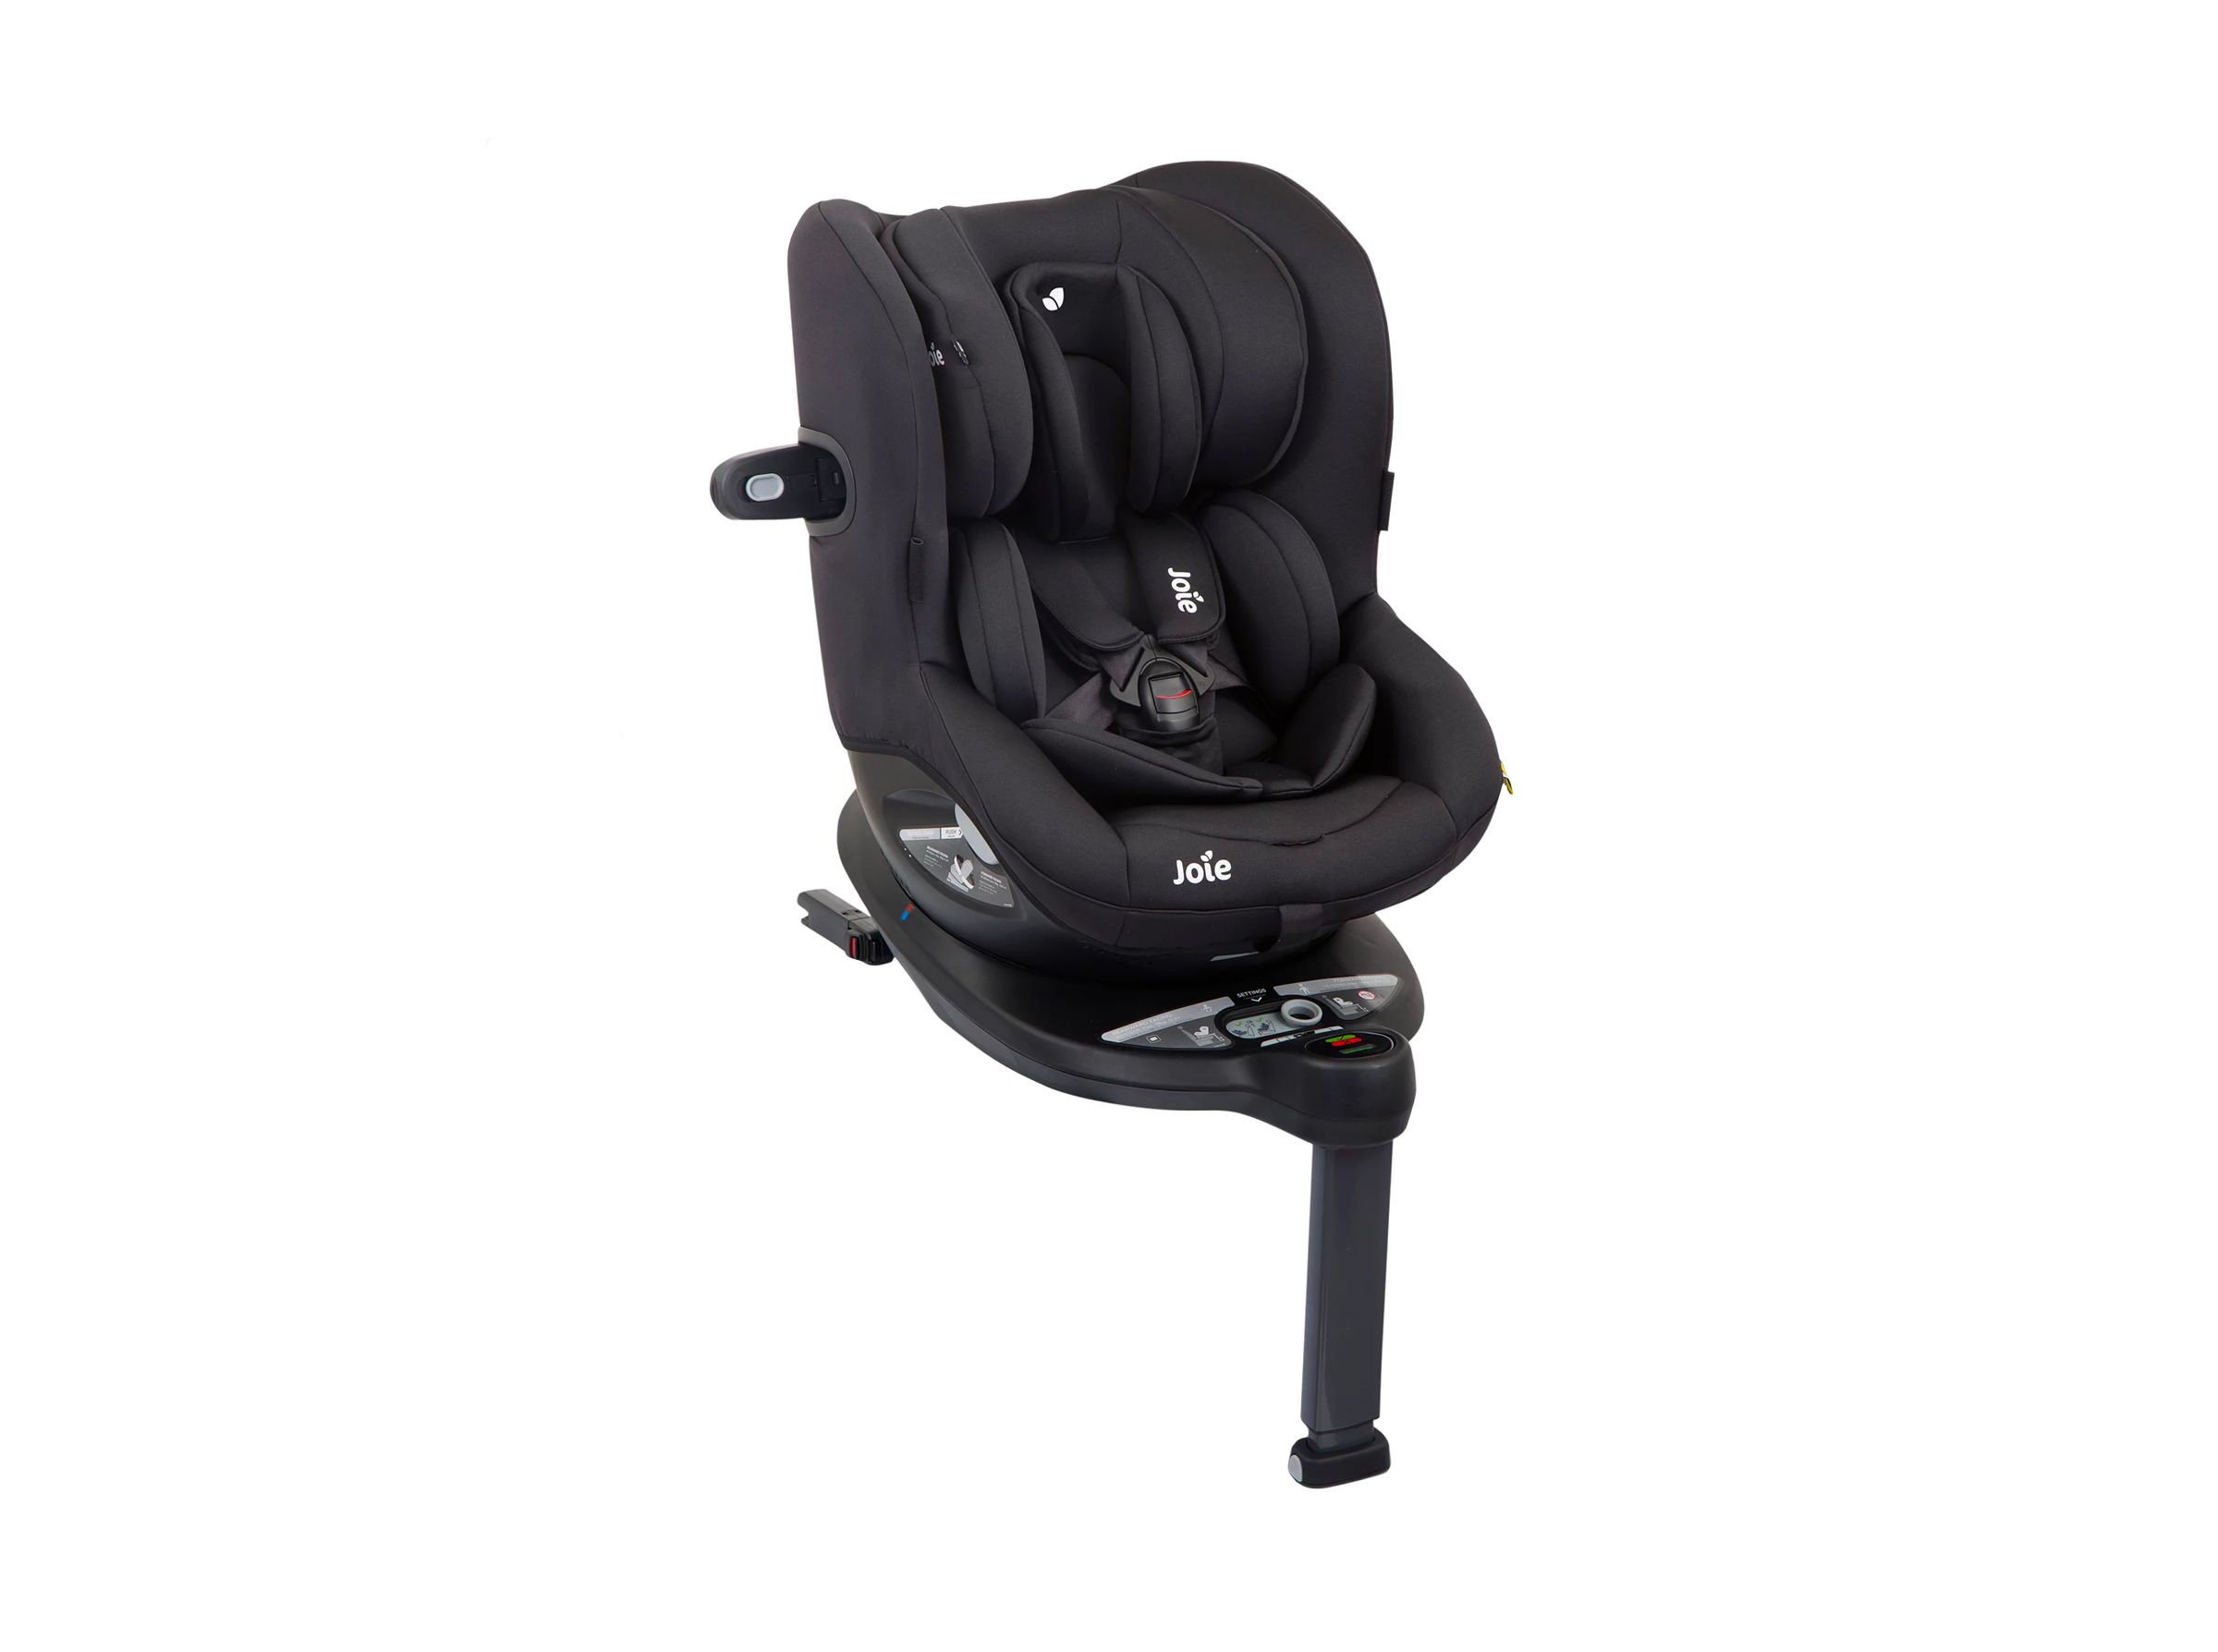 A group 1 car seat